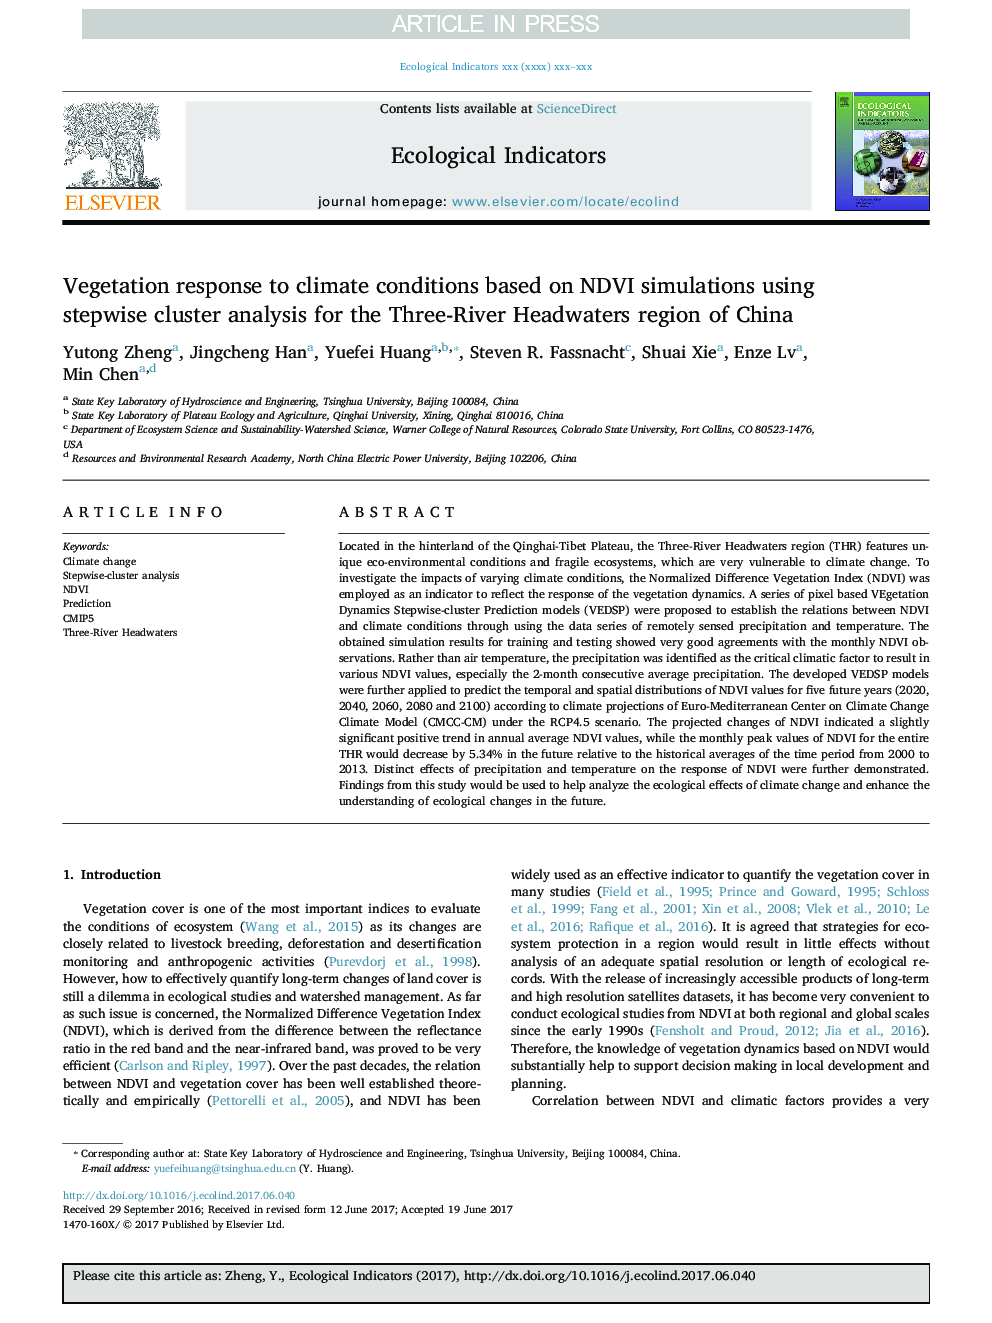 Vegetation response to climate conditions based on NDVI simulations using stepwise cluster analysis for the Three-River Headwaters region of China